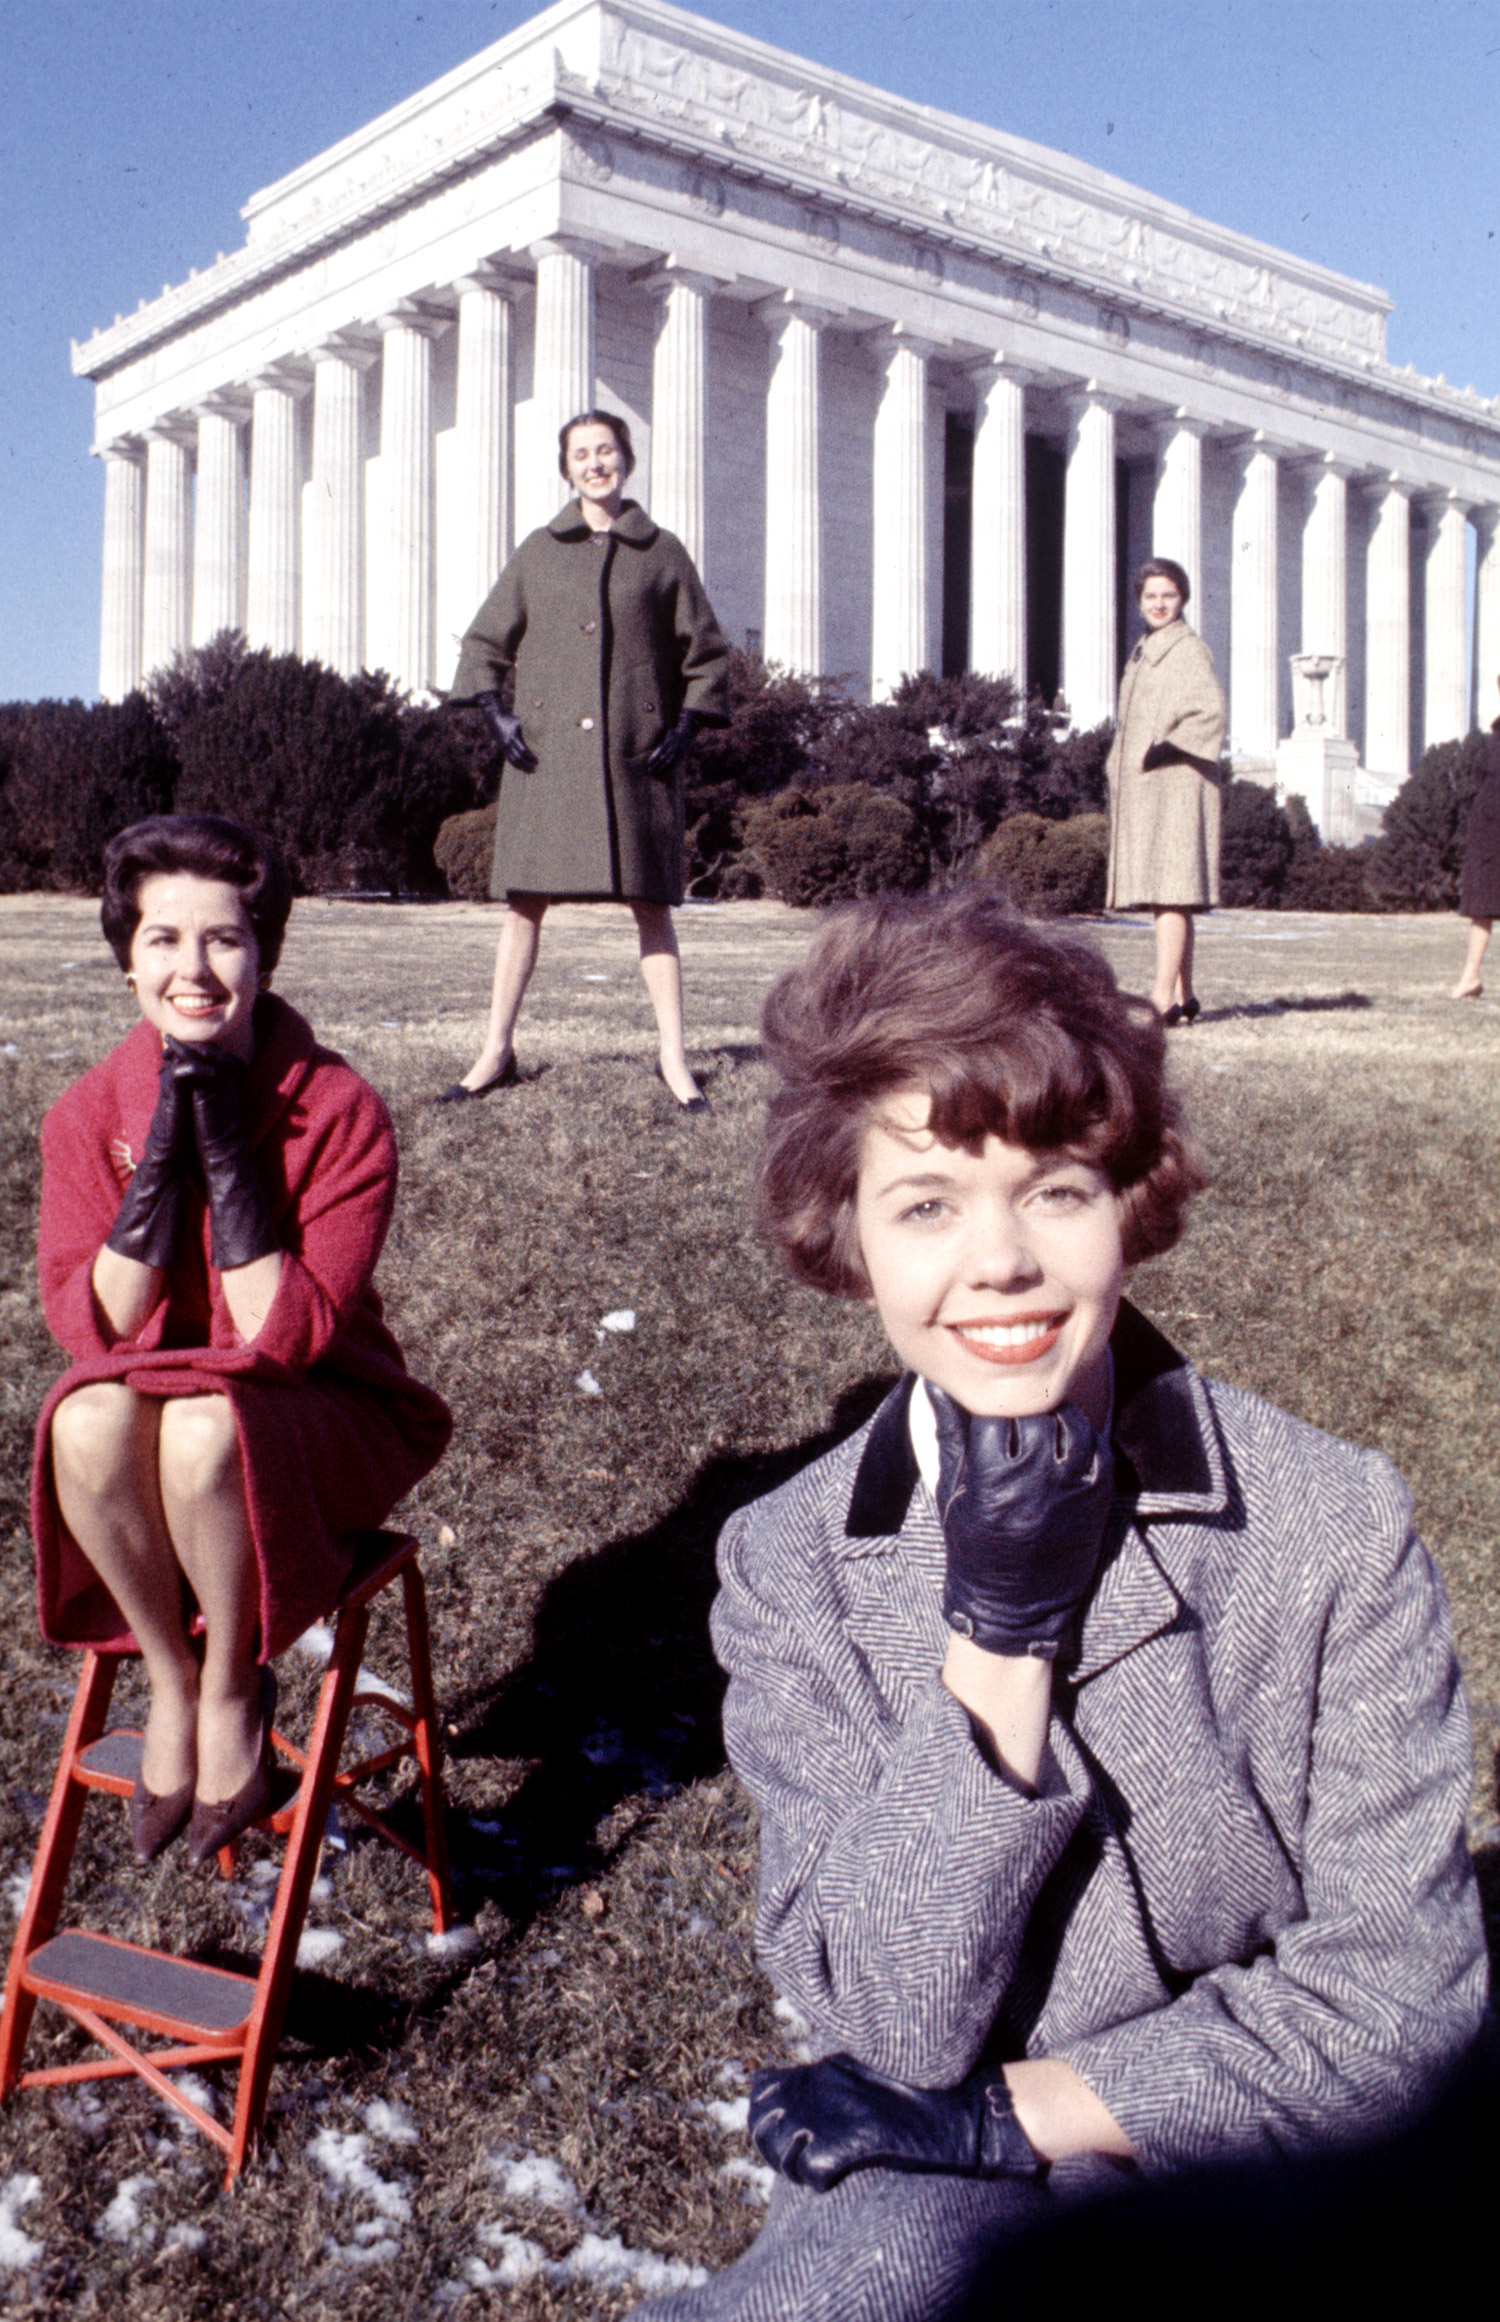 How to be a pretty girl and work in Washington, 1962 photo essay.